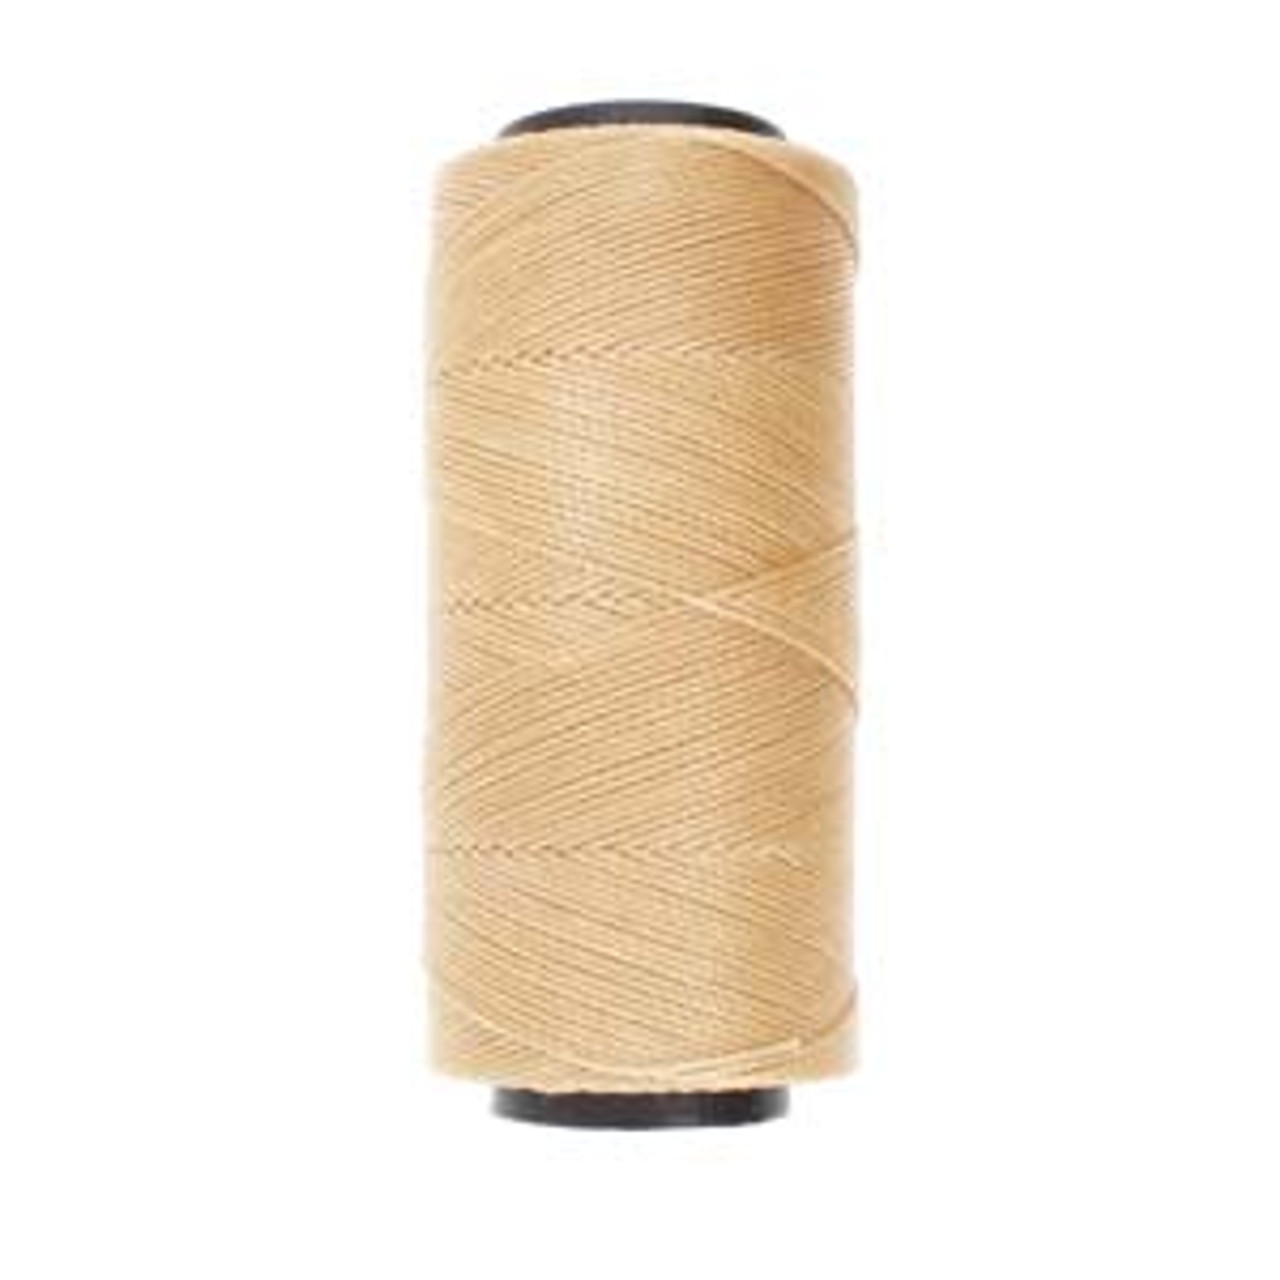 6yds 2 ply Natural Waxed Brazilian Cord